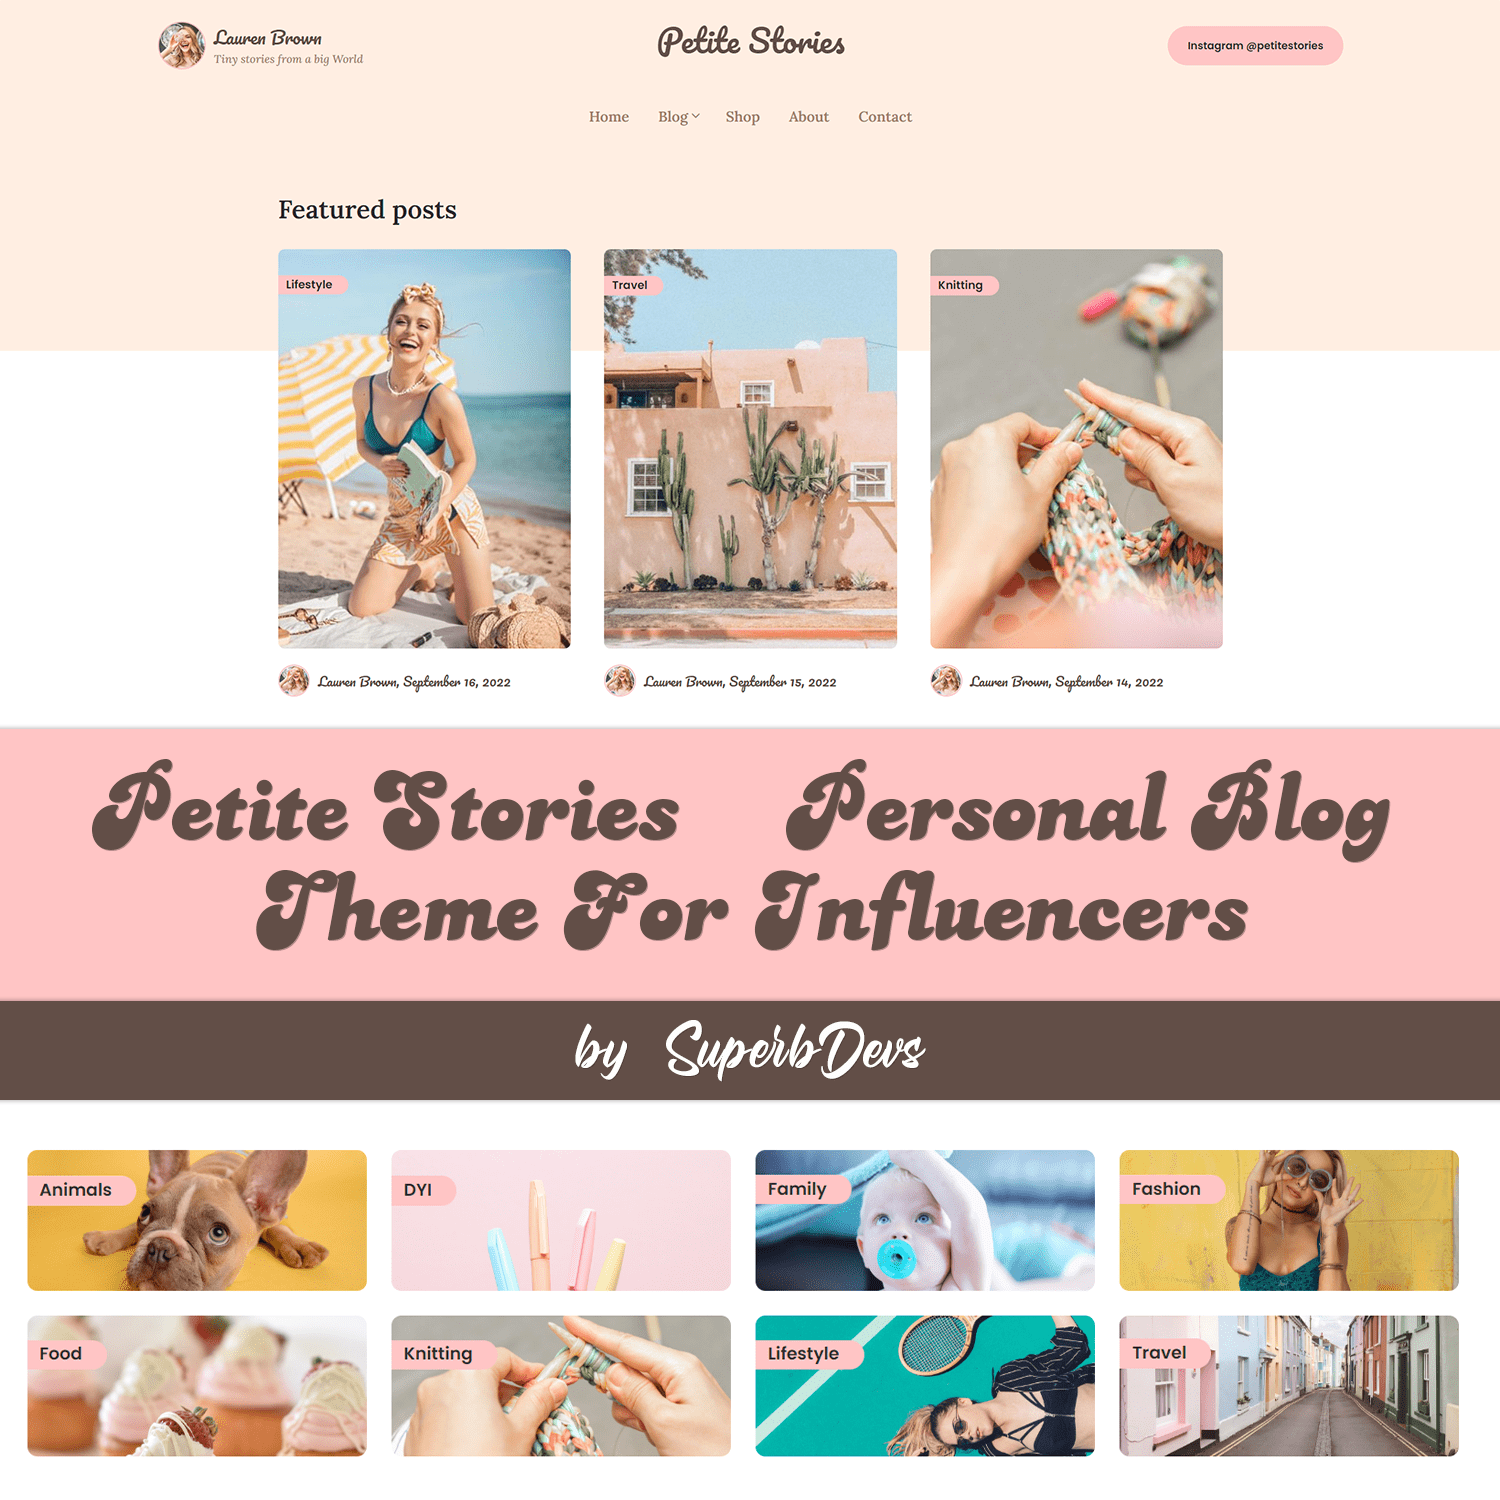 Petite stories, personal blog, theme for influencers.